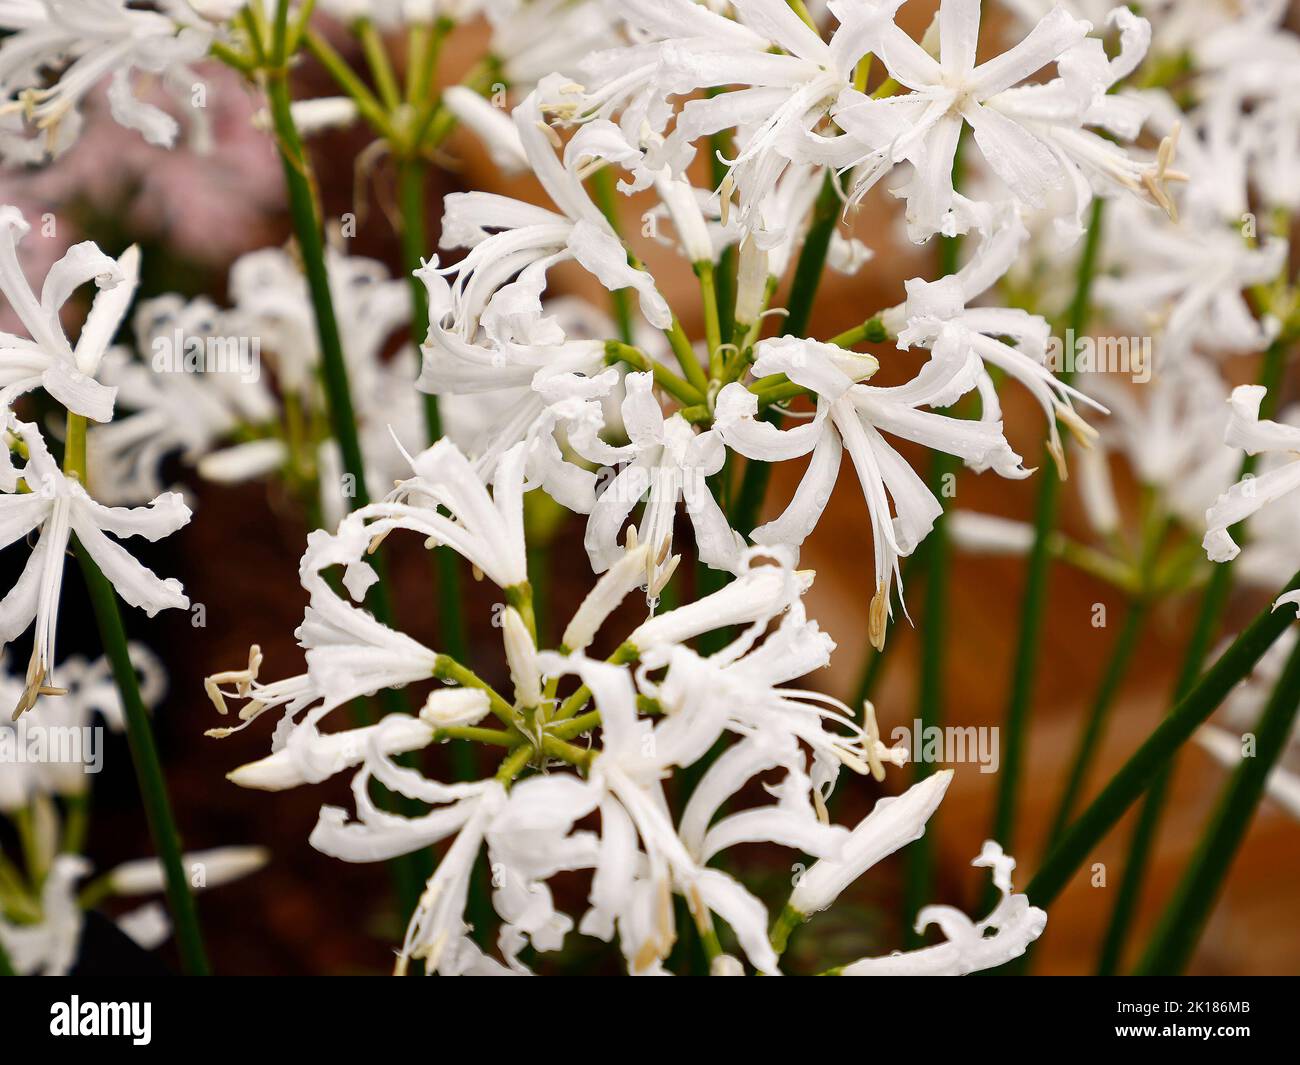 Close up of the flowering garden bulb Nerine bowdenii Alba seen in the UK. Stock Photo